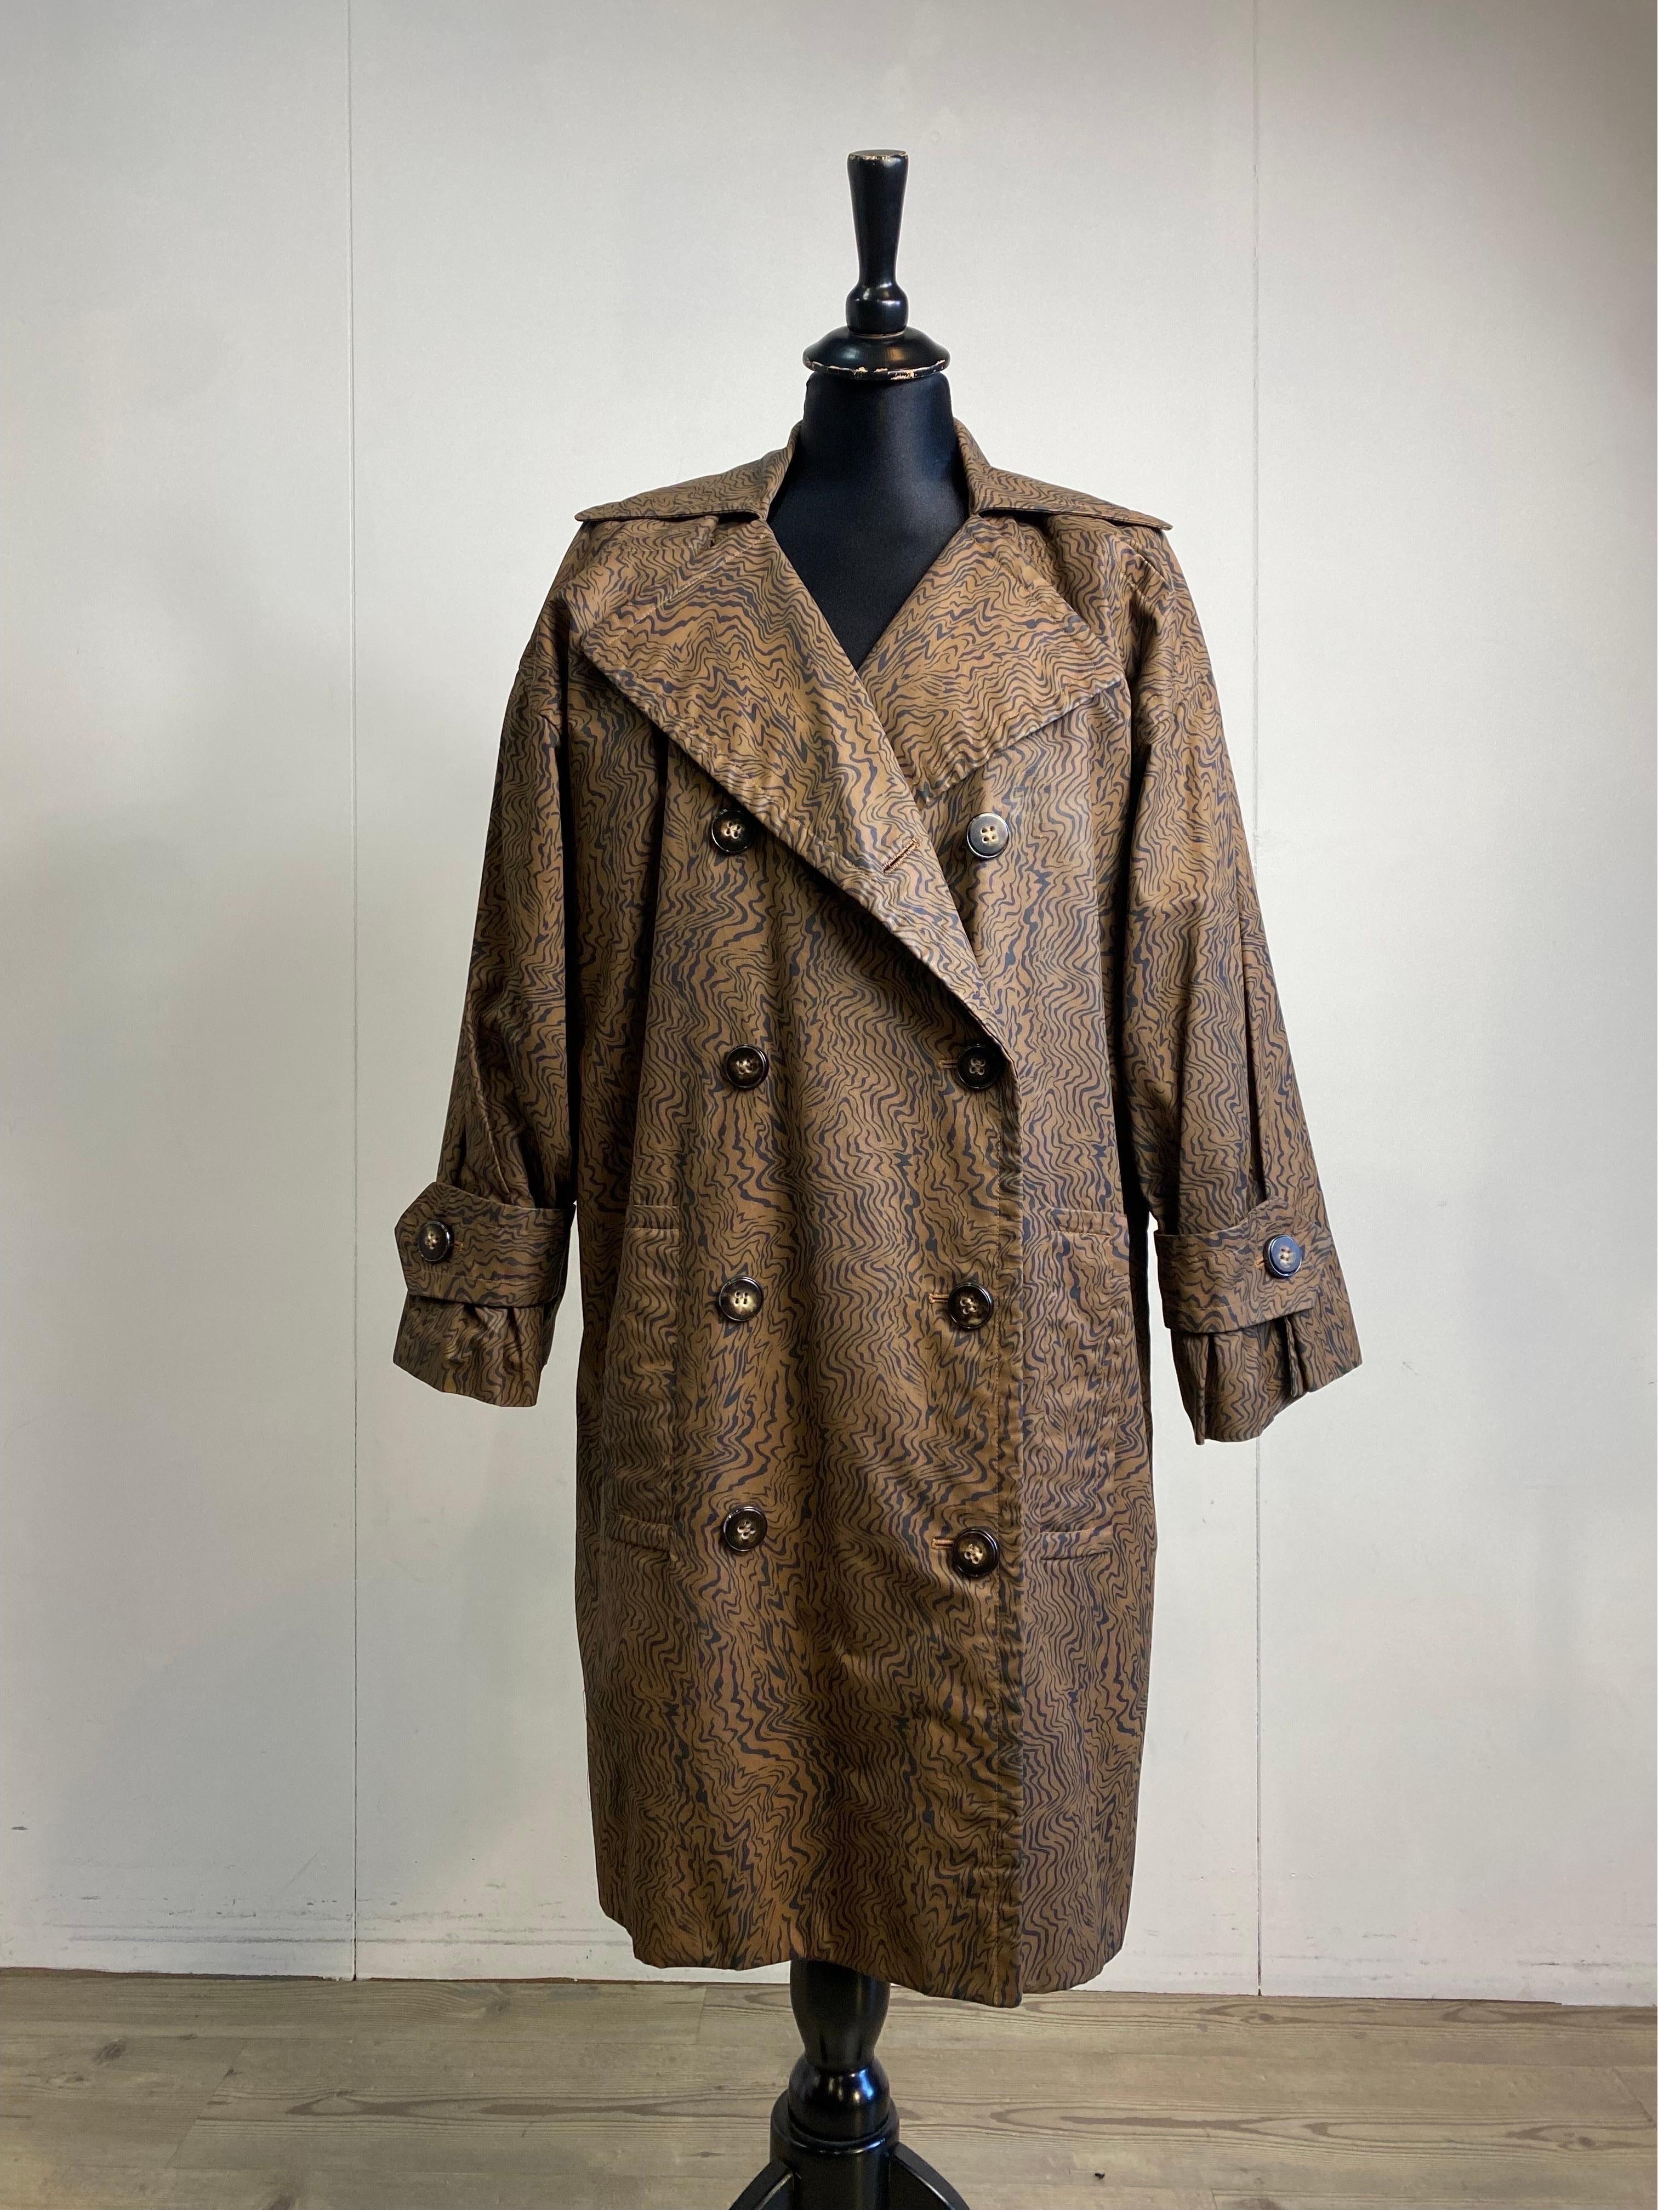 Zebra Saint Laurent trench coat.
Vintage piece from the 70s/80s
Composition label missing. It looks like an oilcloth.
French size 40 which corresponds to an Italian 44.
Shoulders 55 cm
Bust 62 cm
Length 98 cm
Sleeve 48 cm
In good general condition,